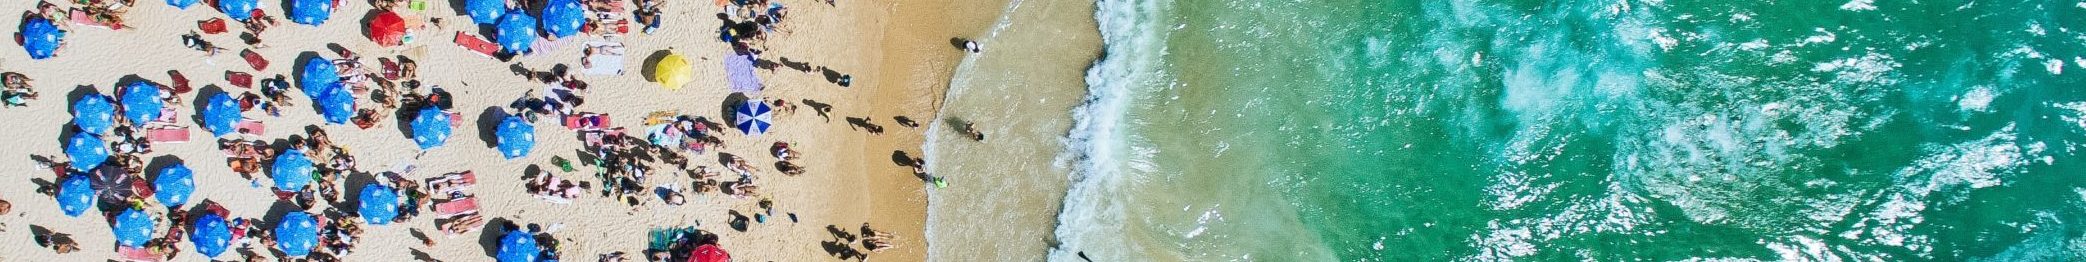 People at the beach, drone shot